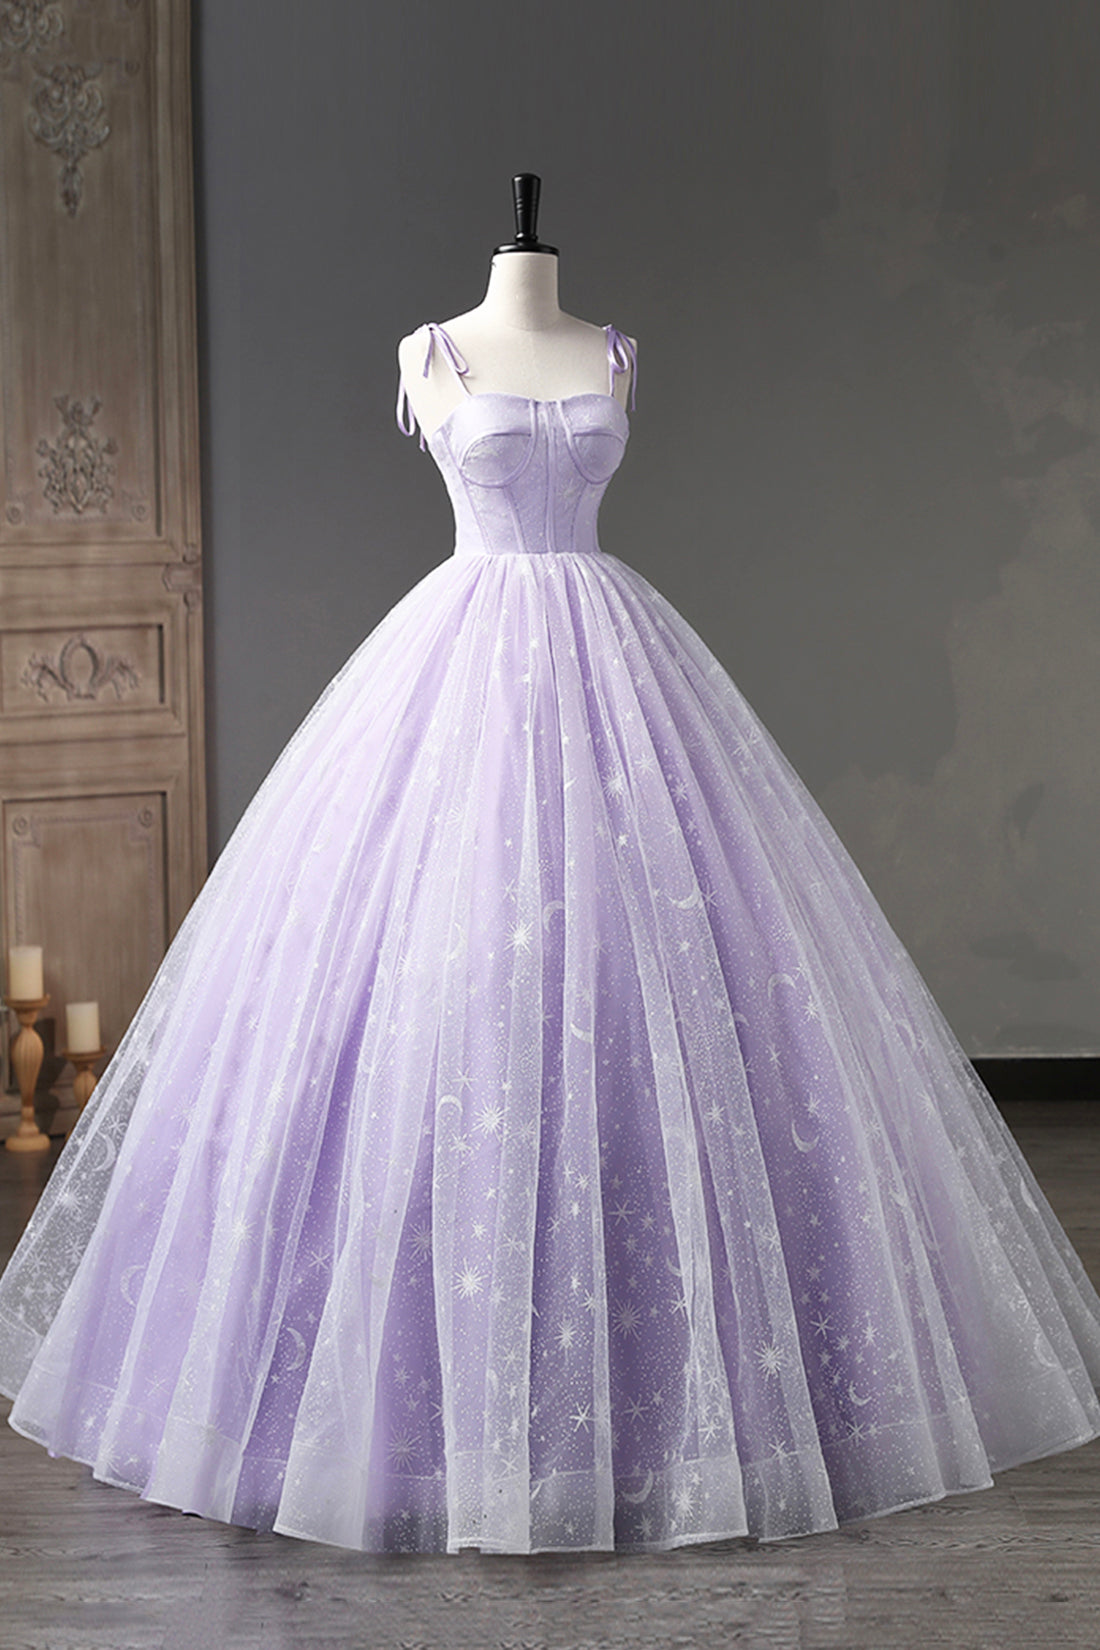 Ball Gown V Neck Beaded Lavender Formal Evening Dress | Purple prom dress,  Lavender prom dresses, Ball gowns